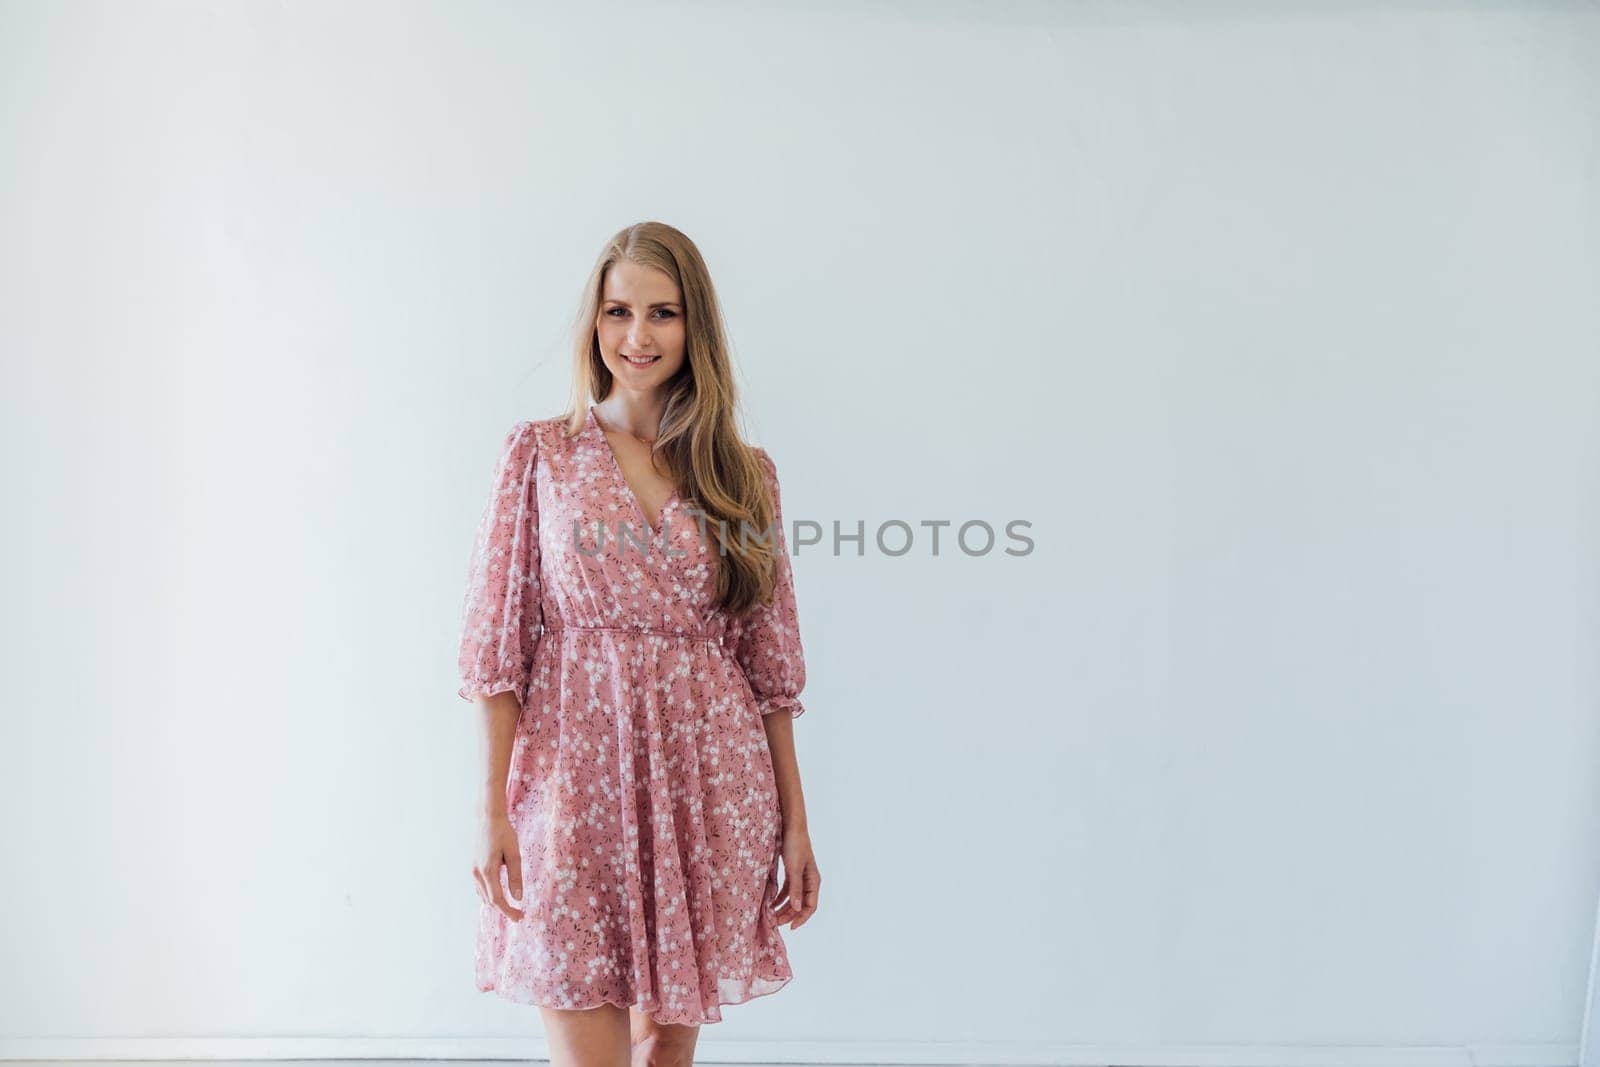 blonde woman in a pink floral dress poses in a bright room